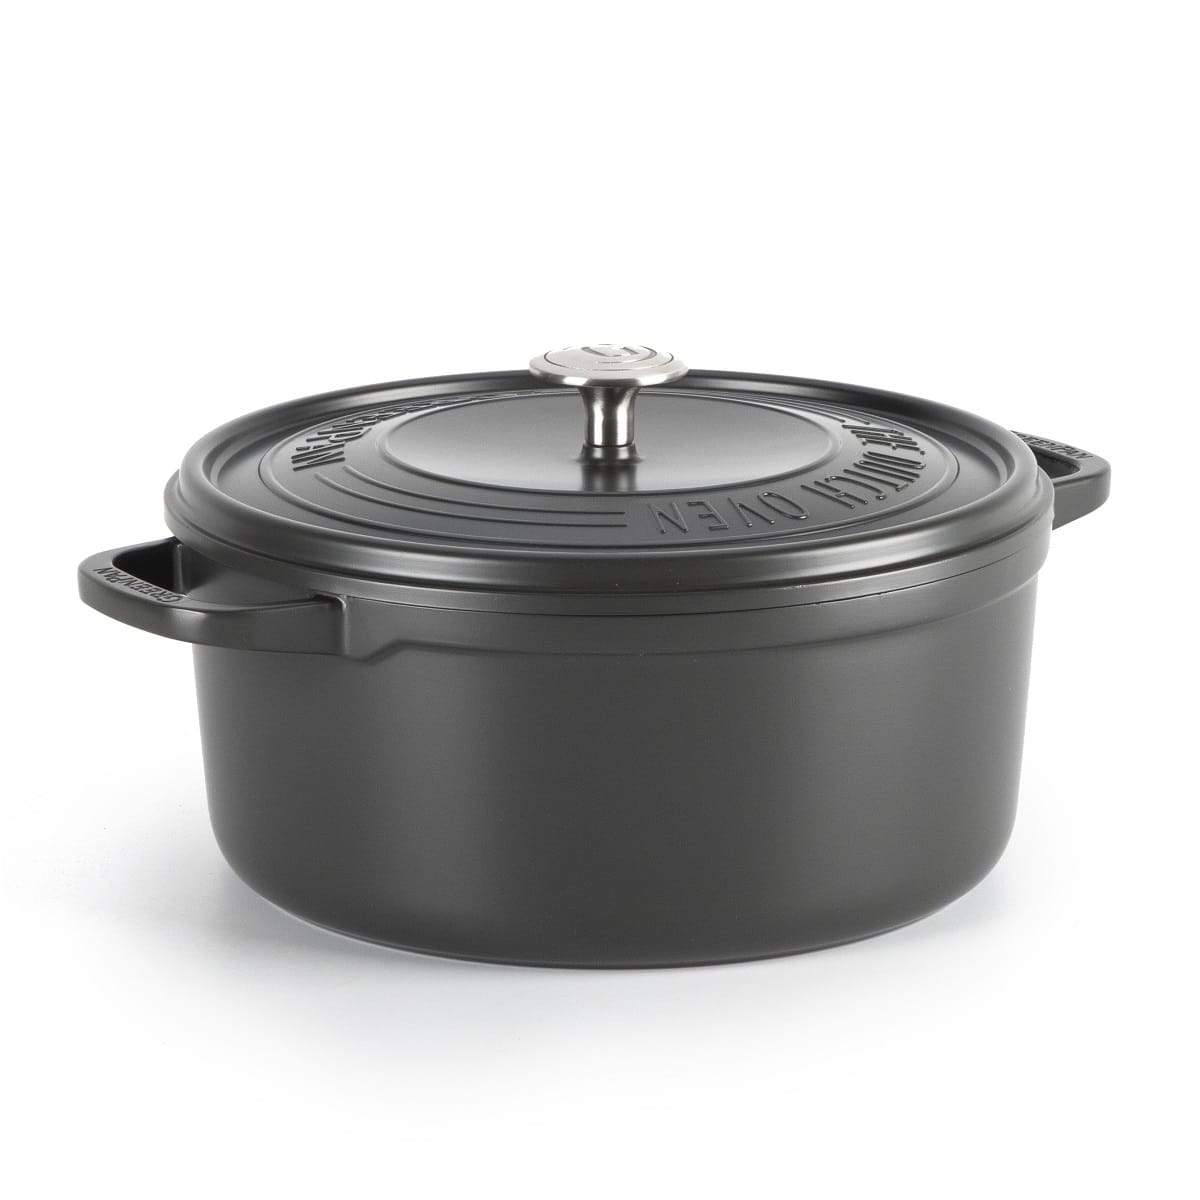 CC002299-001 - Featherweights Casserole with Lid, Browny Black - 24cm - Product Image 3